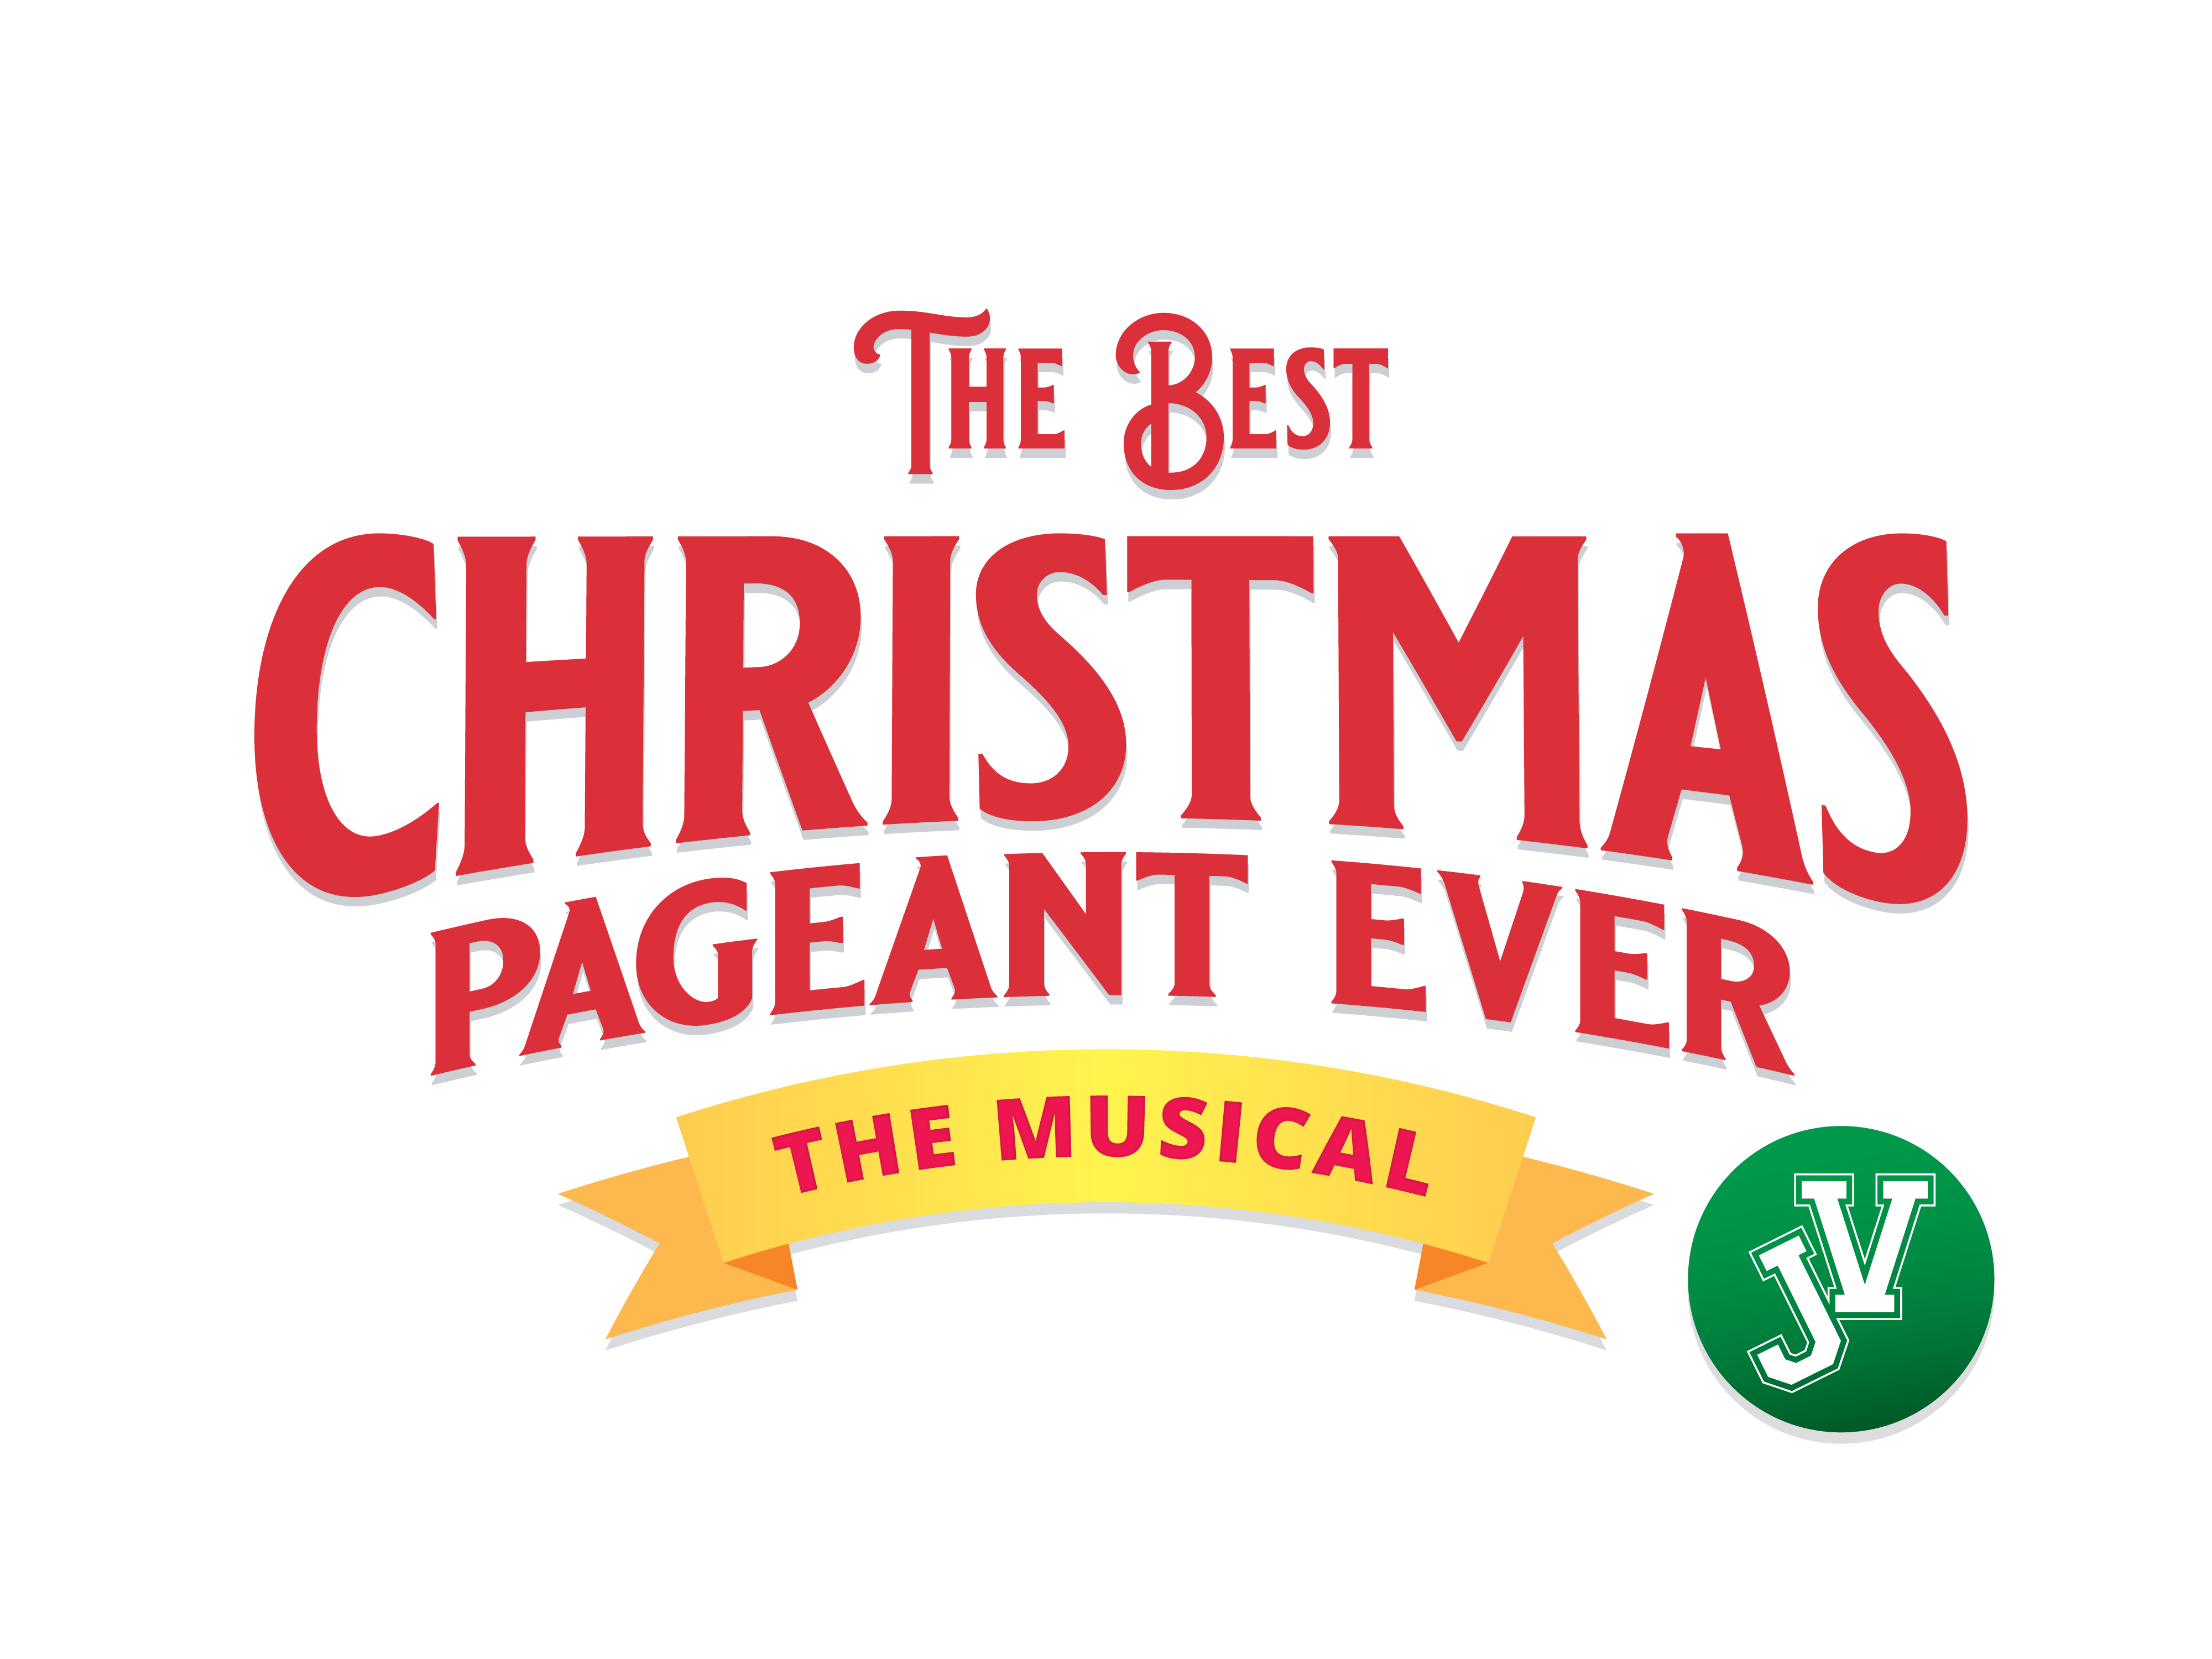 The Best Christmas Pageant Ever the Musical JV